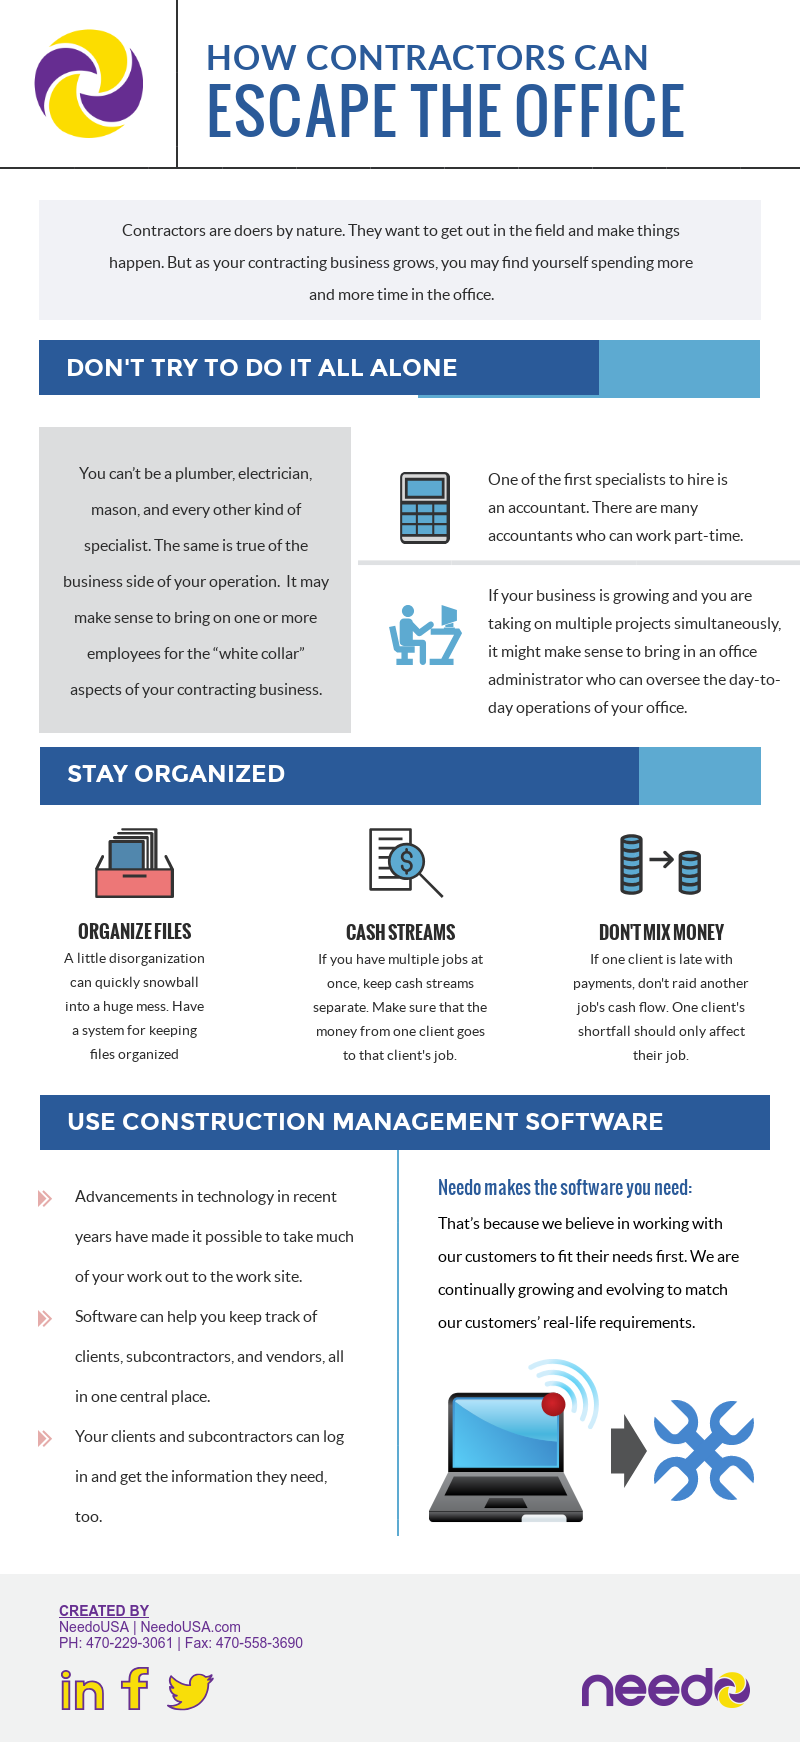 How Contractors Can Escape the Office [infographic]